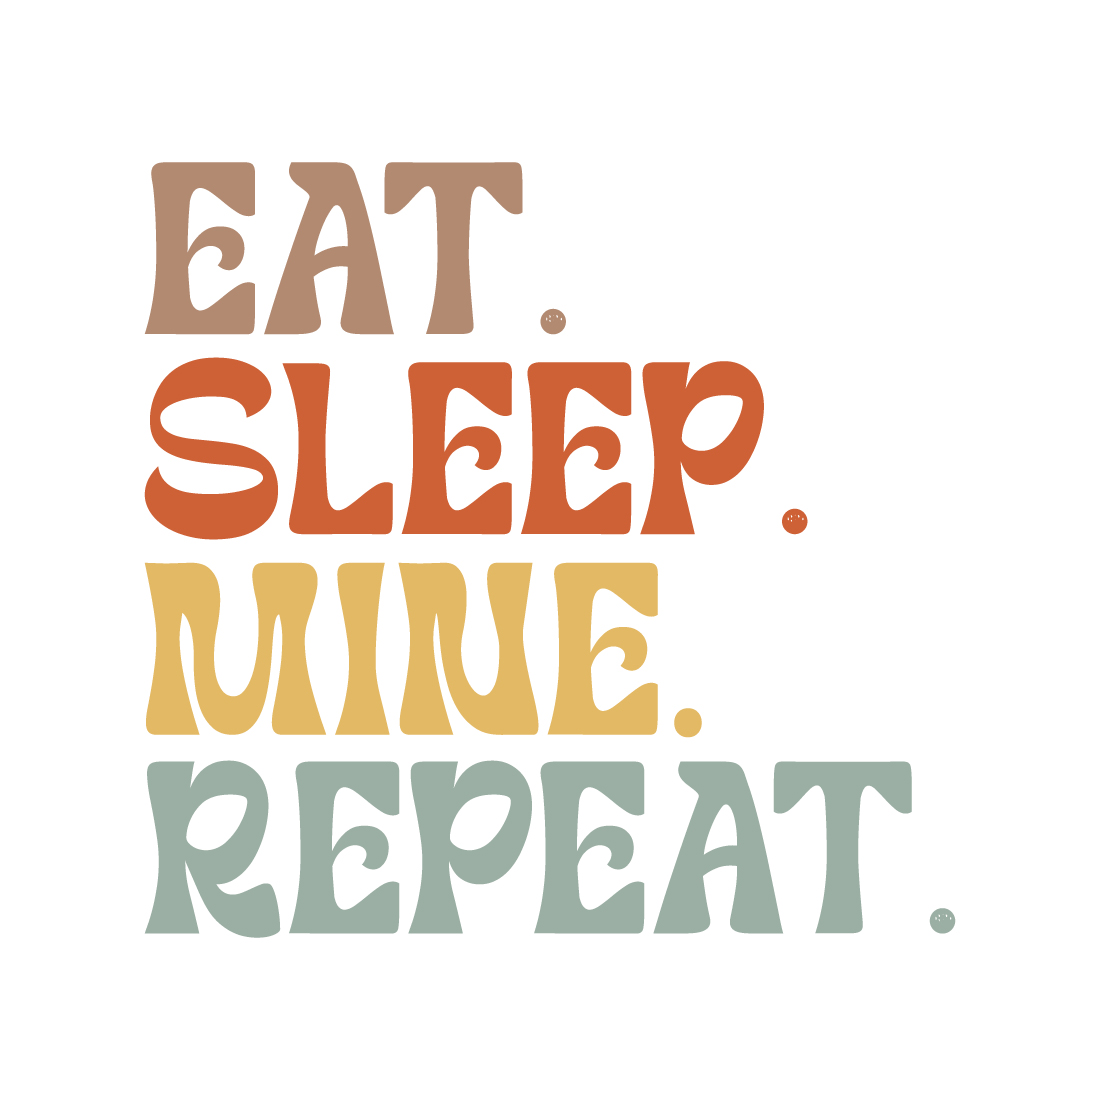 Eat Sleep mine Repeat typography design for t-shirts, cards, frame artwork, phone cases, bags, mugs, stickers, tumblers, print, etc cover image.